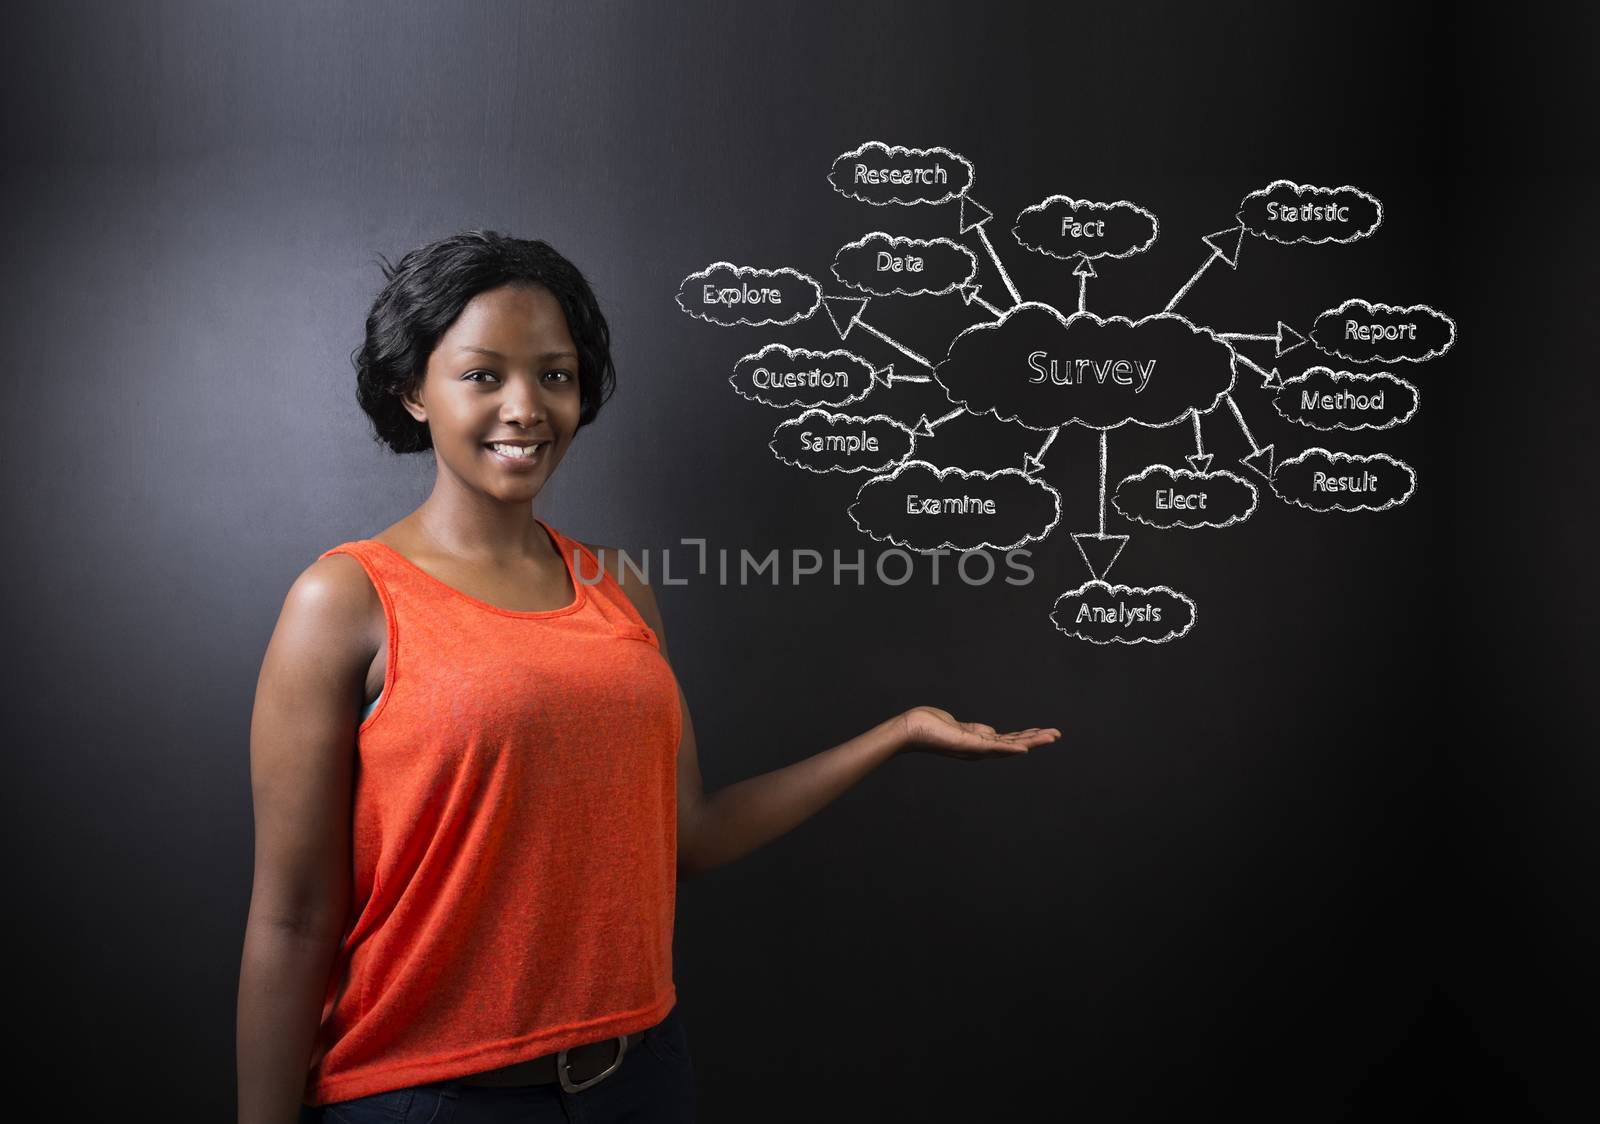 South African or African American woman teacher or student holding hand out against a blackboard background with a chalk survey diagram concept